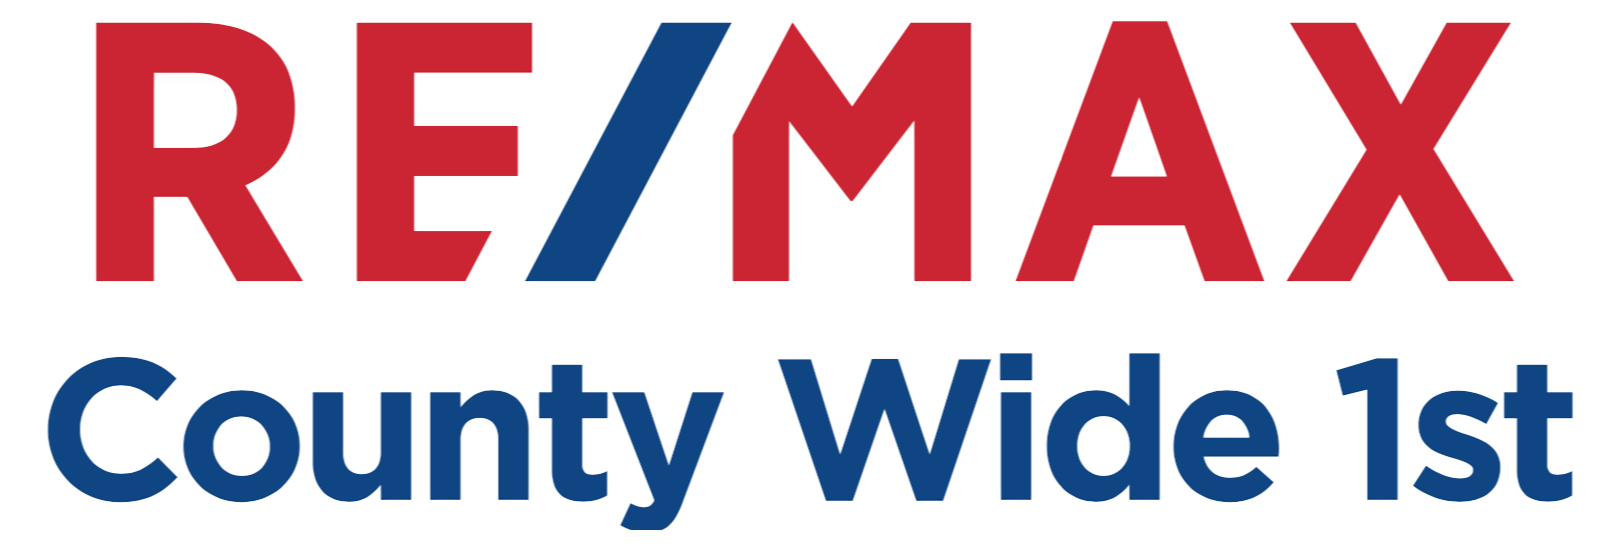 RE/MAX County Wide 1st